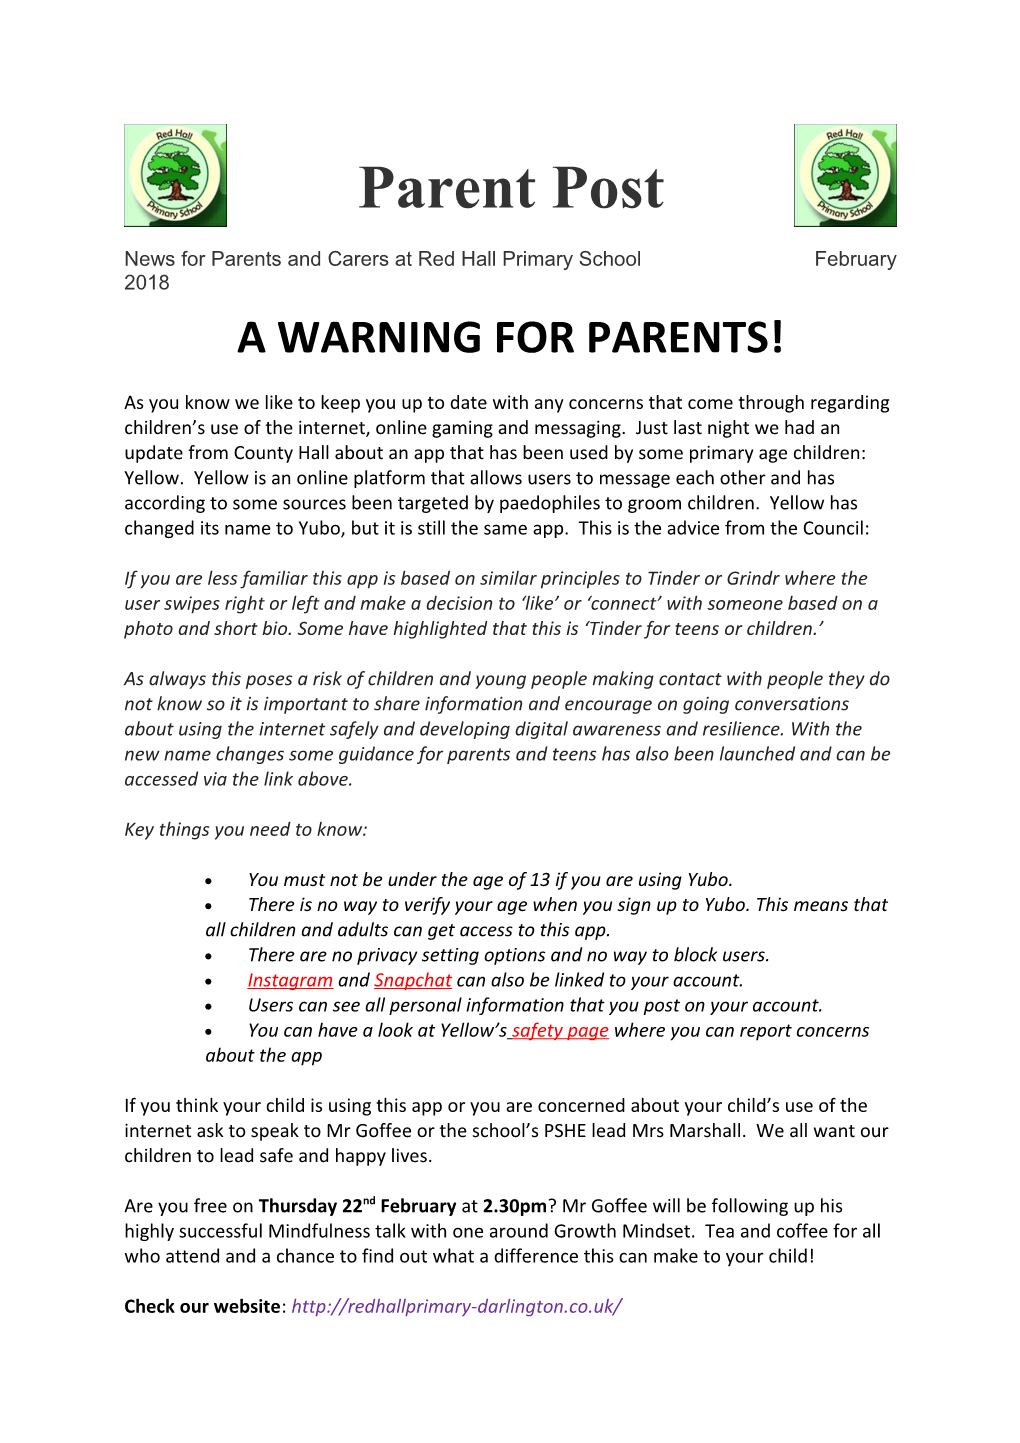 News for Parents and Carers at Red Hall Primary School February 2018